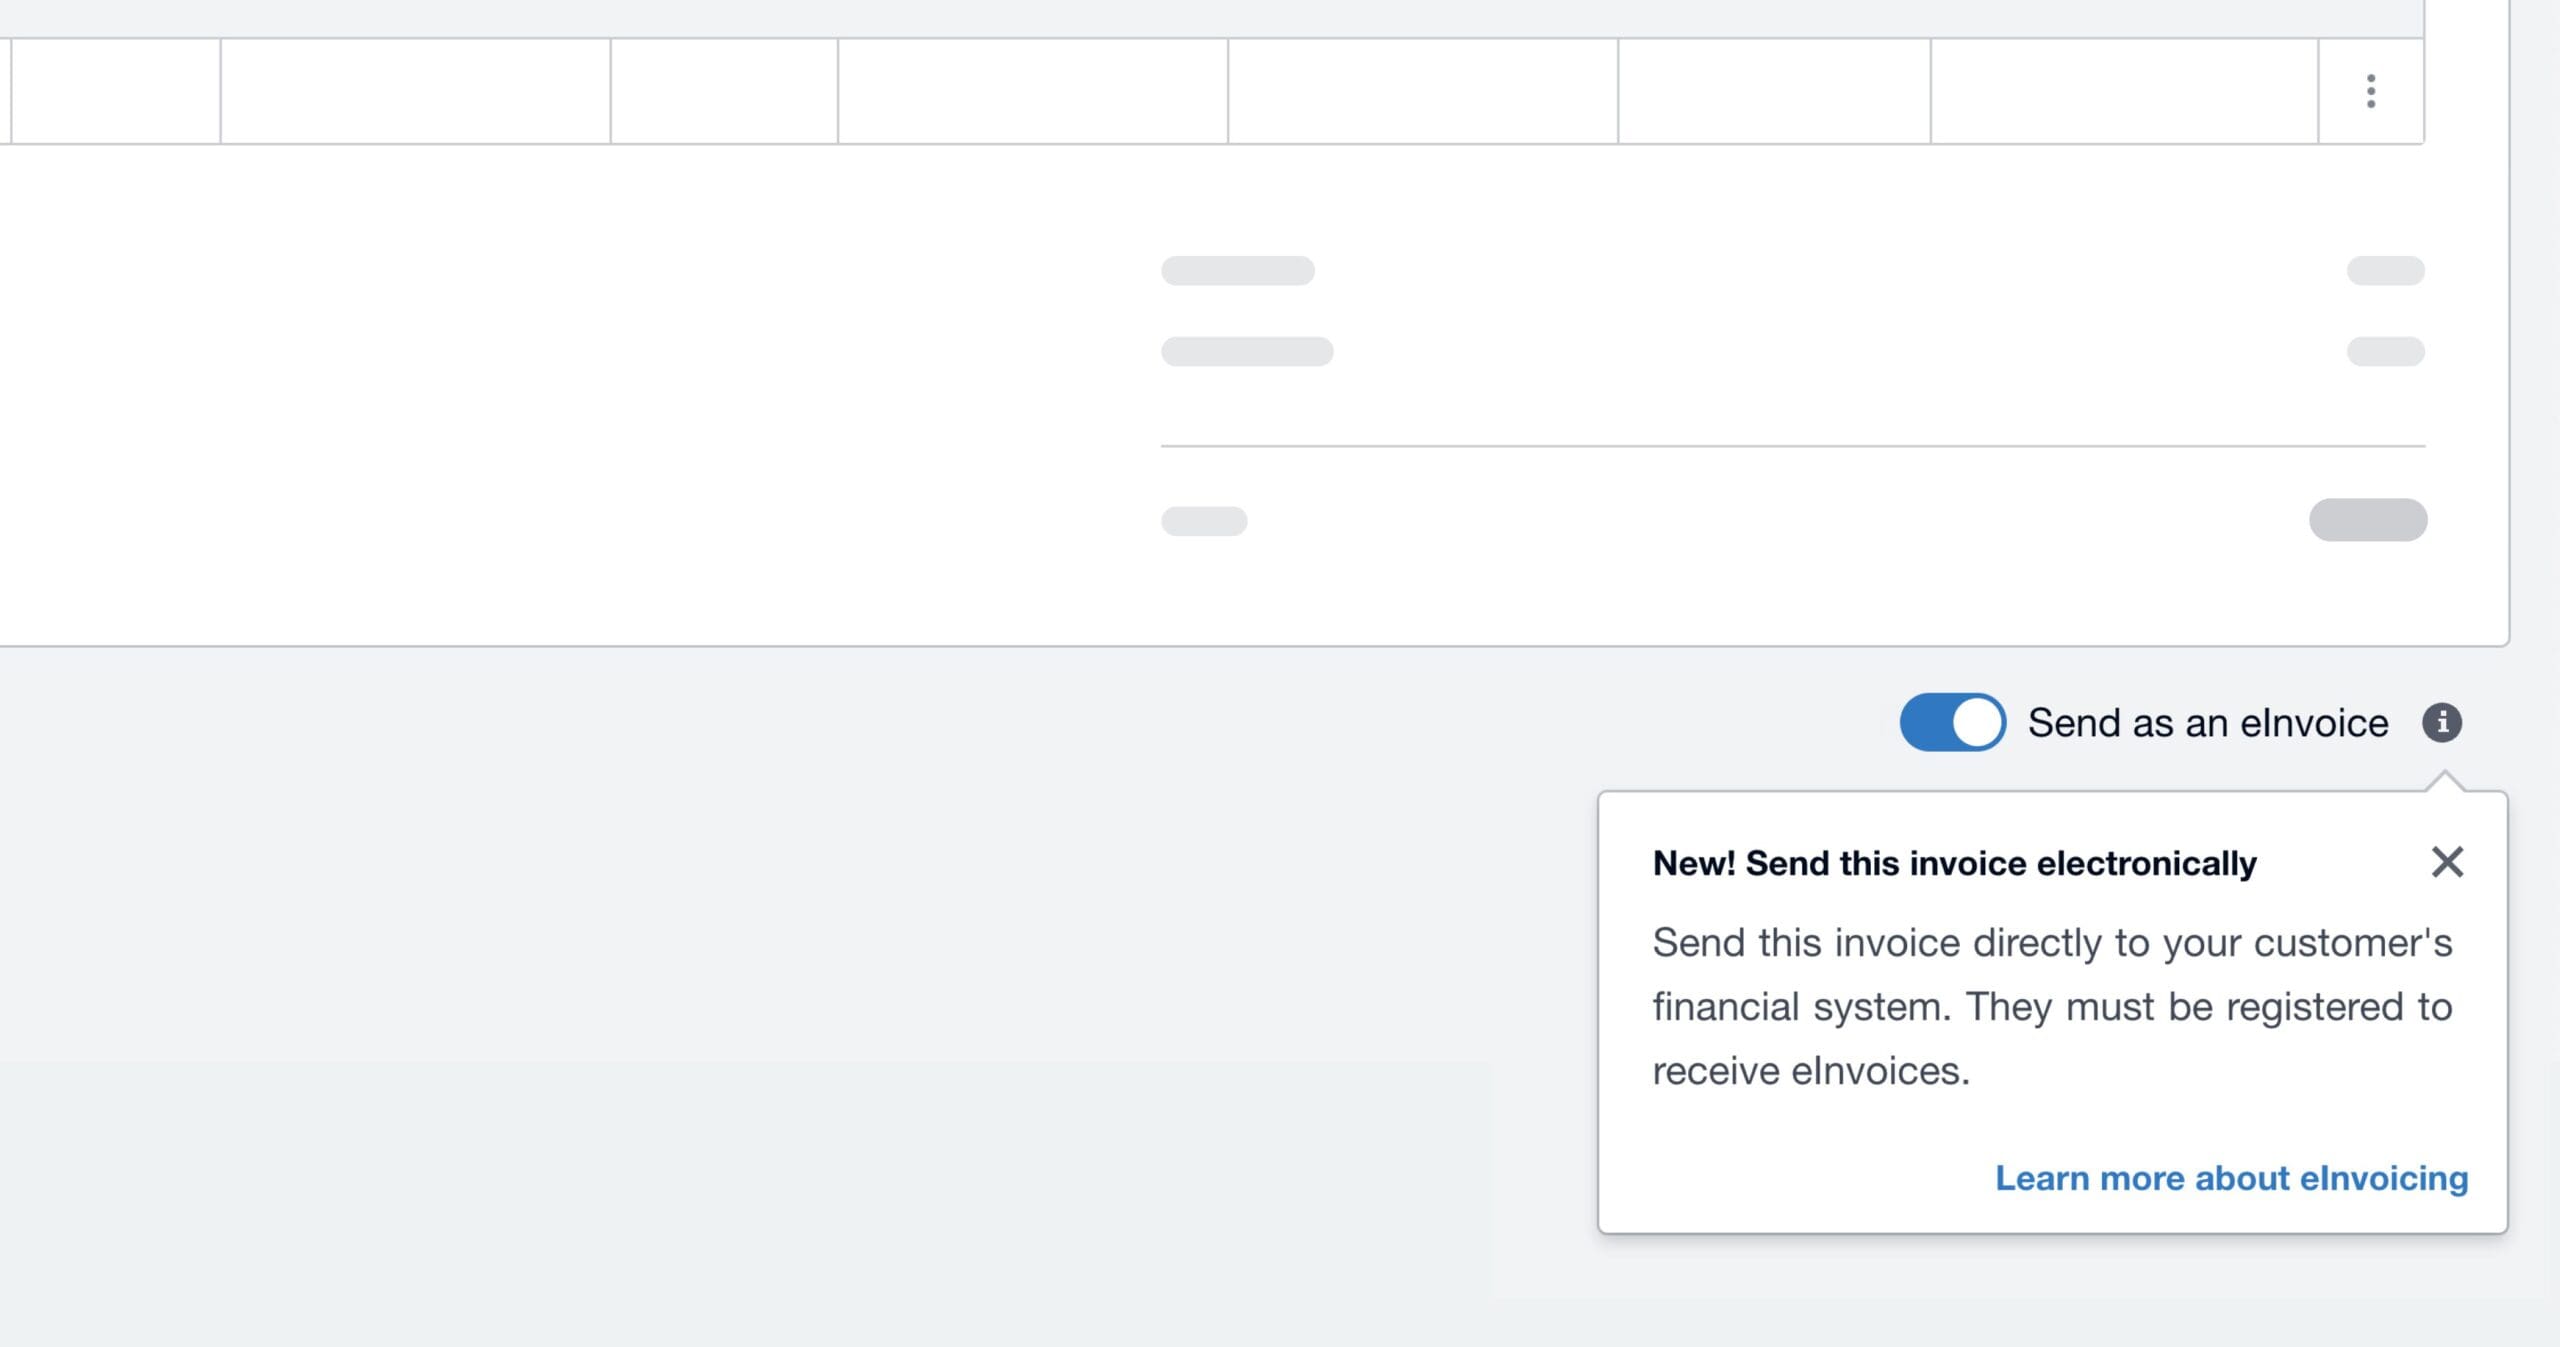 Screenshot of new invoicing in Xero showing the send as an eInvoice feature